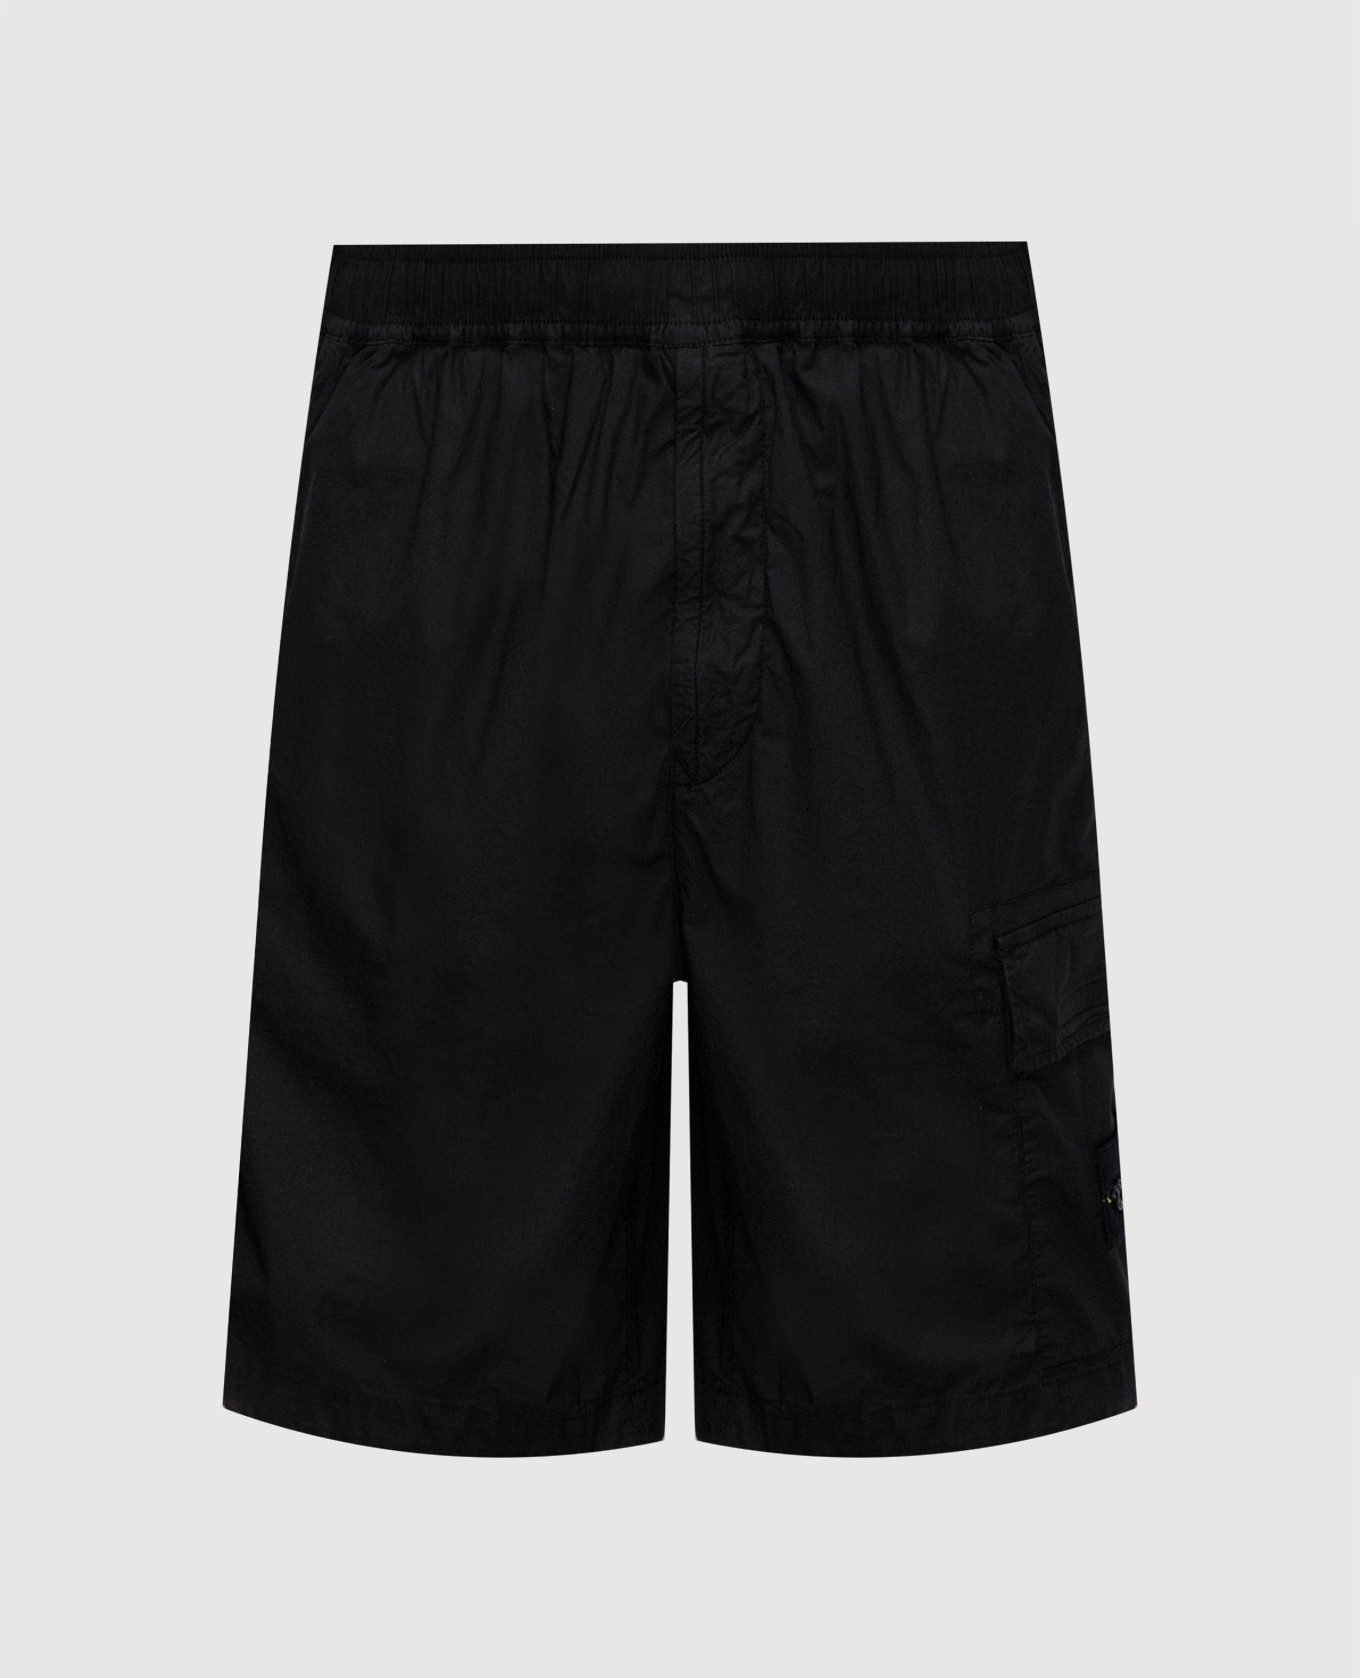 Black cargo shorts with logo patch